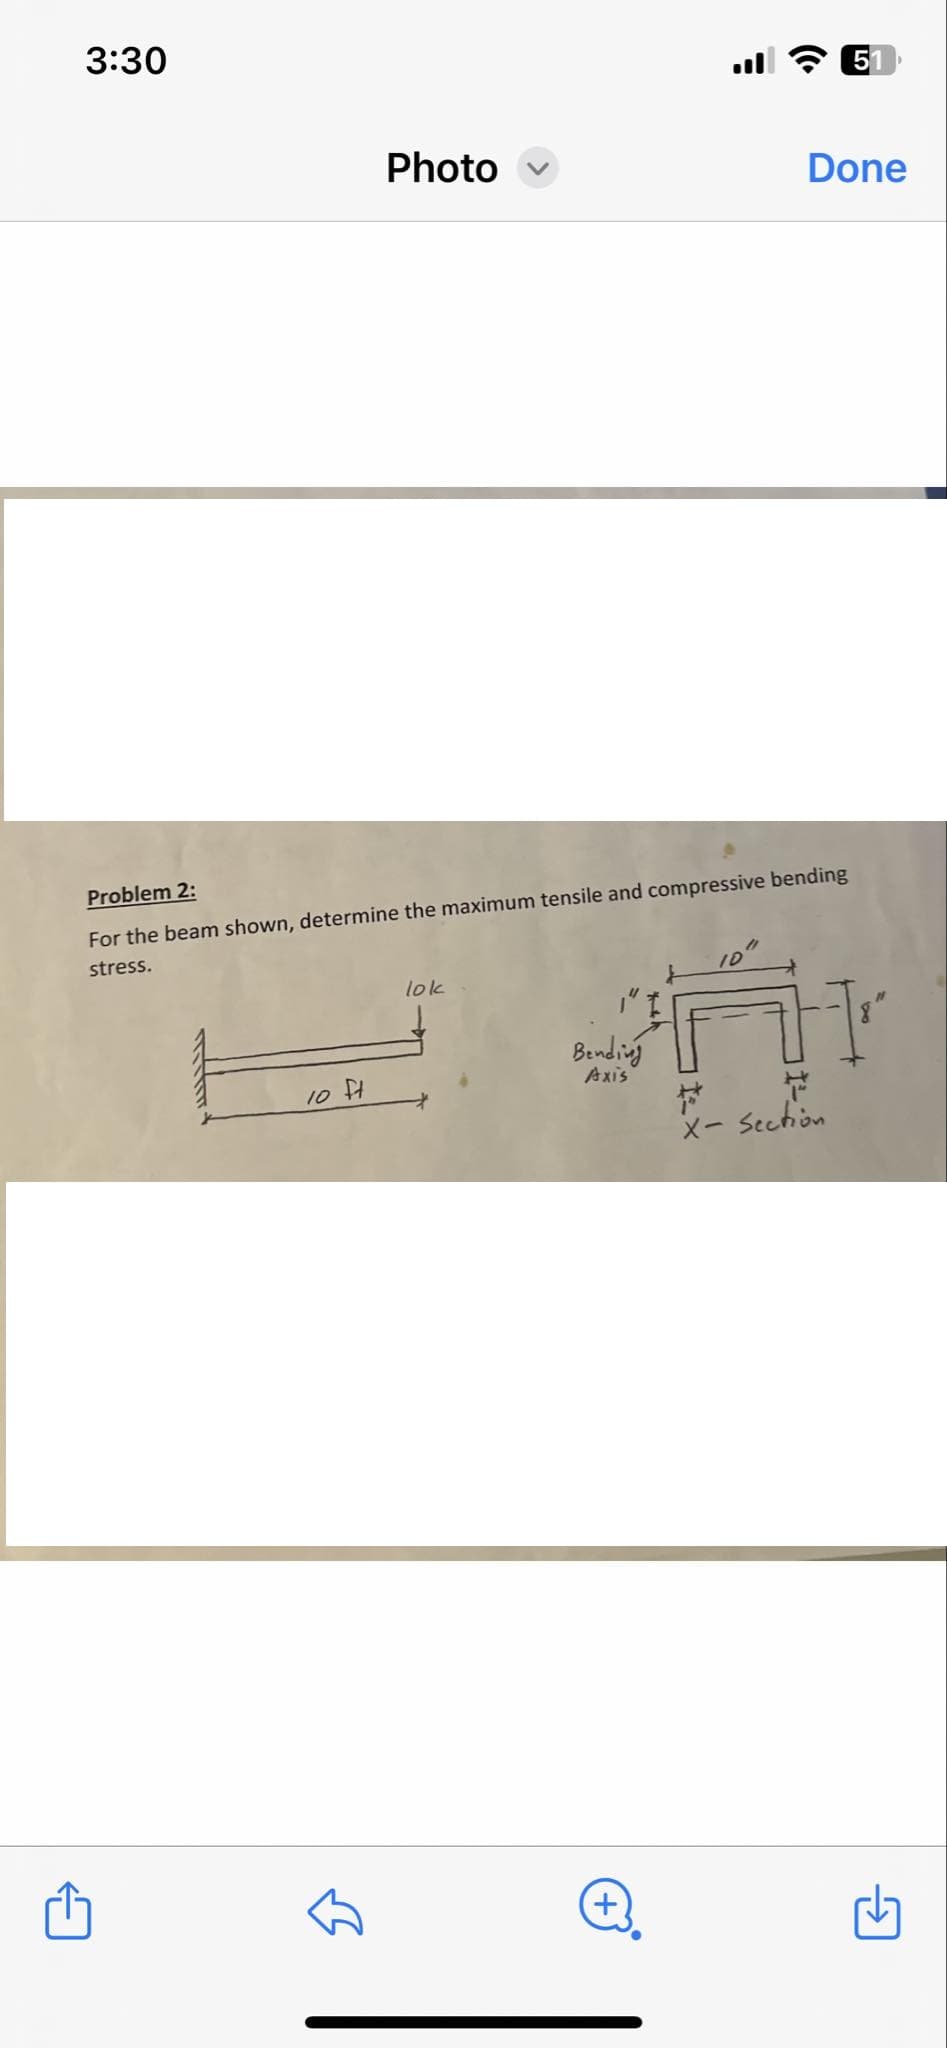 3:30
51
Photo
Done
Problem 2:
For the beam shown, determine the maximum tensile and compressive bending
stress.
10 ft
lok
Bending
+
Axis
H
ㄚ
X-Section